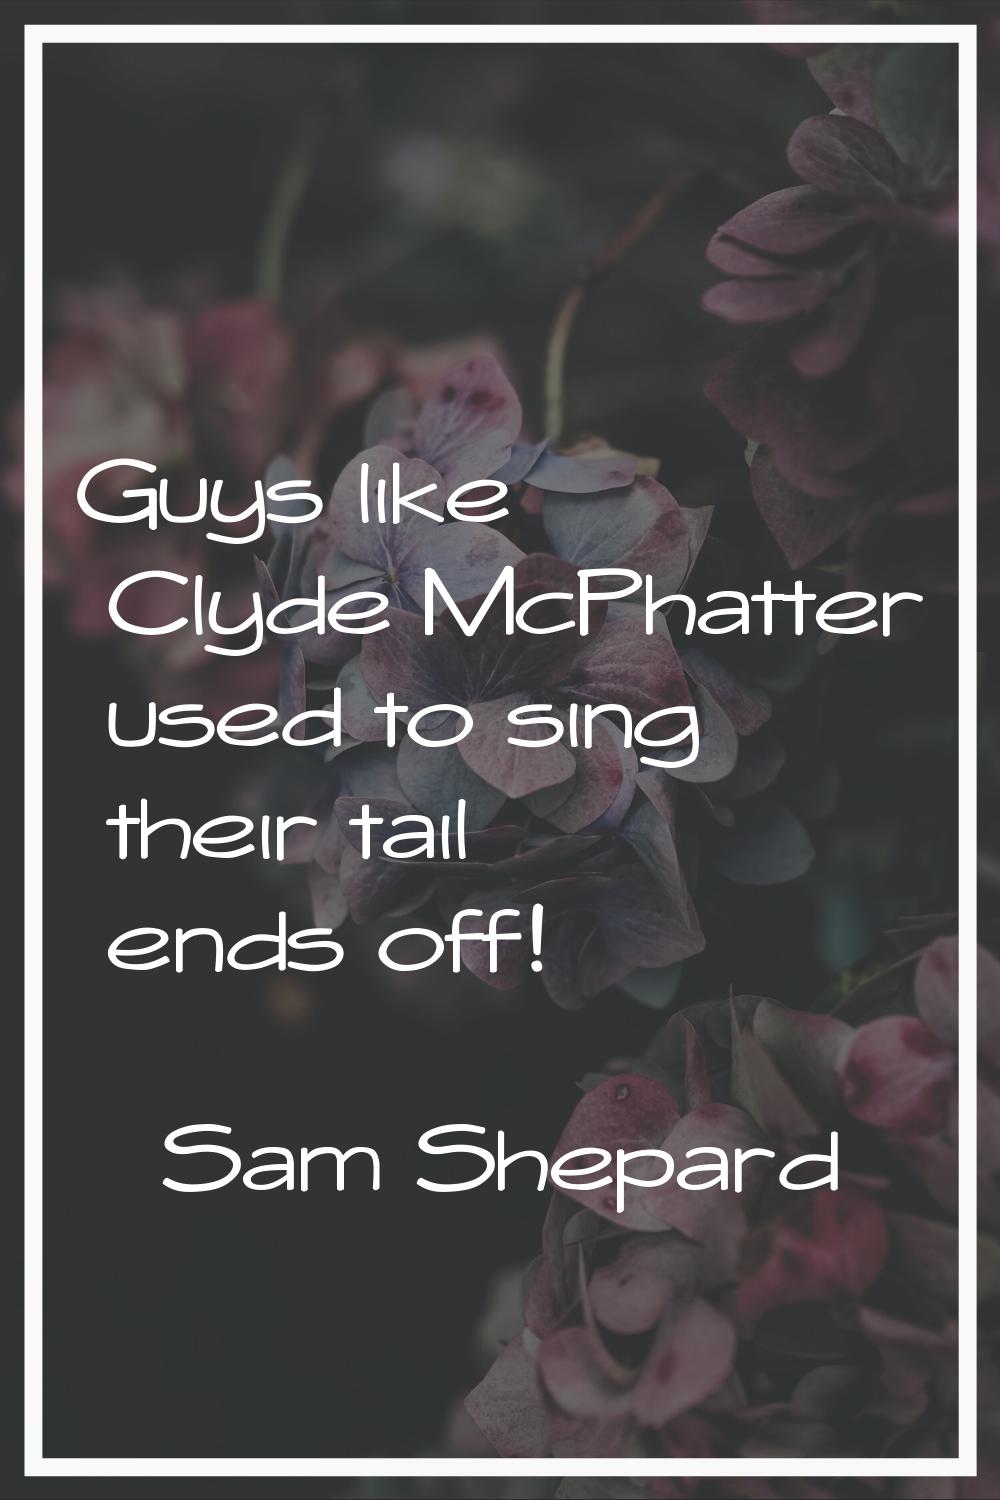 Guys like Clyde McPhatter used to sing their tail ends off!